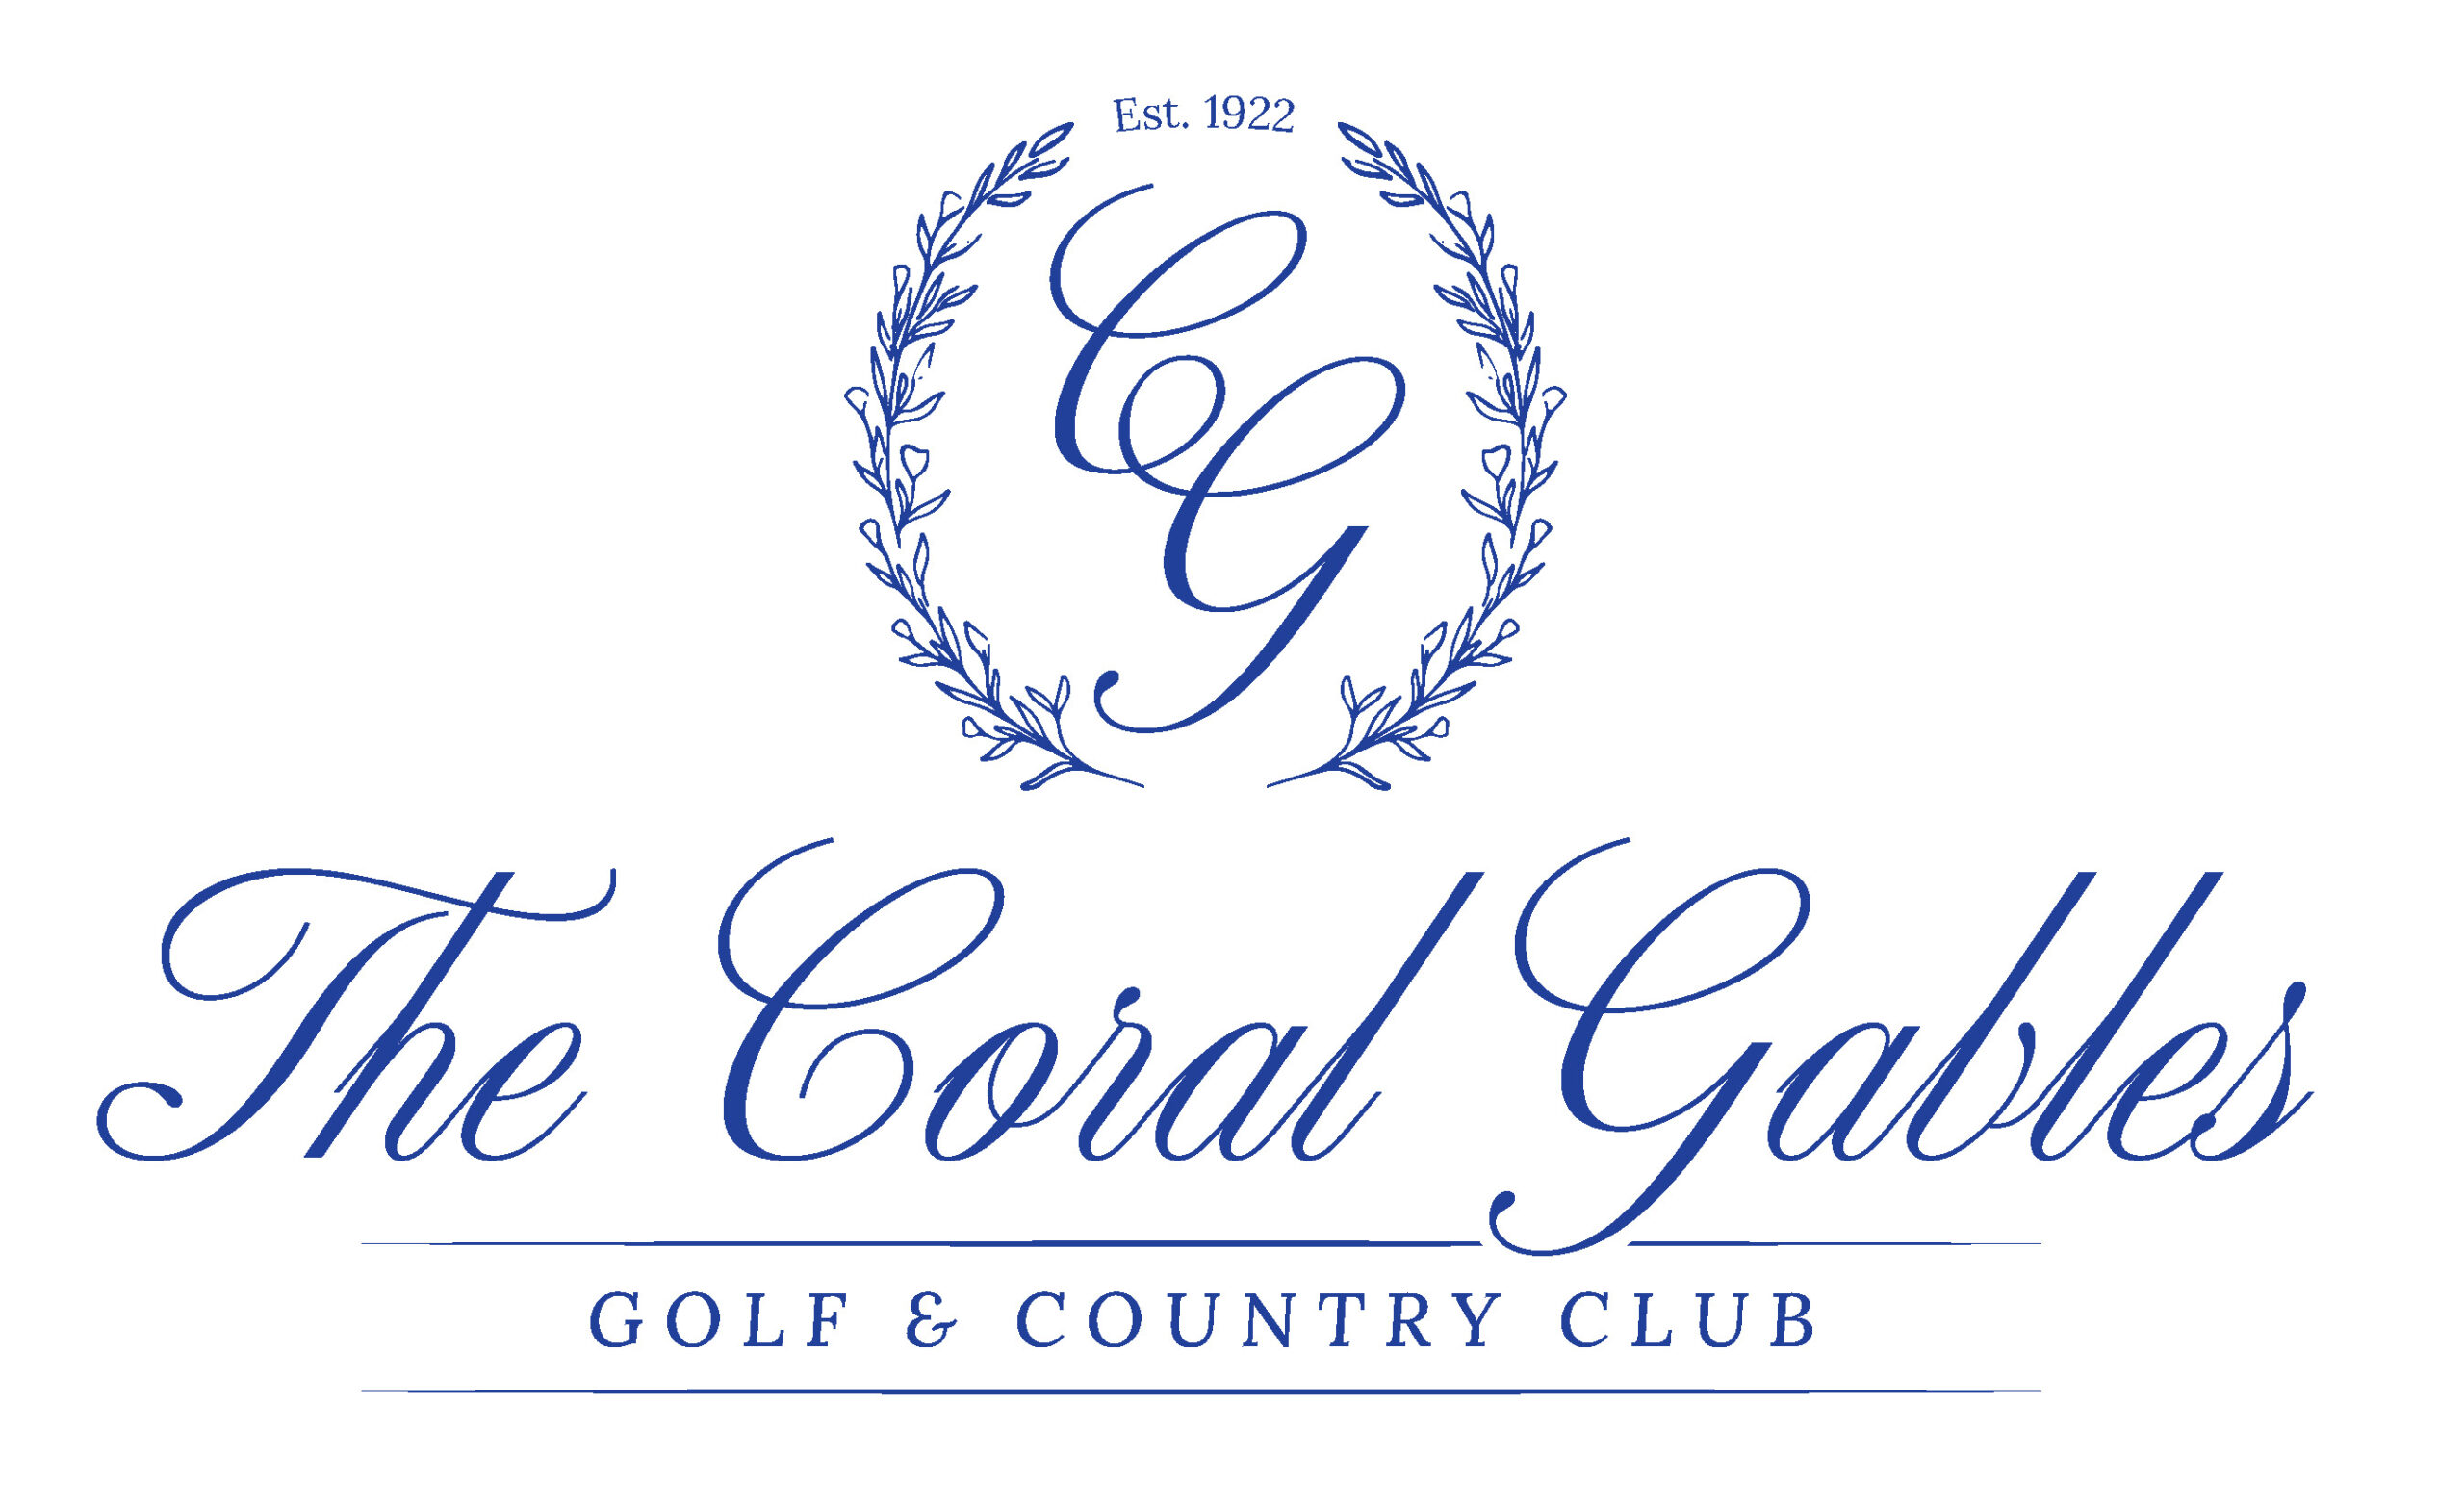 Coral Gables Country Club